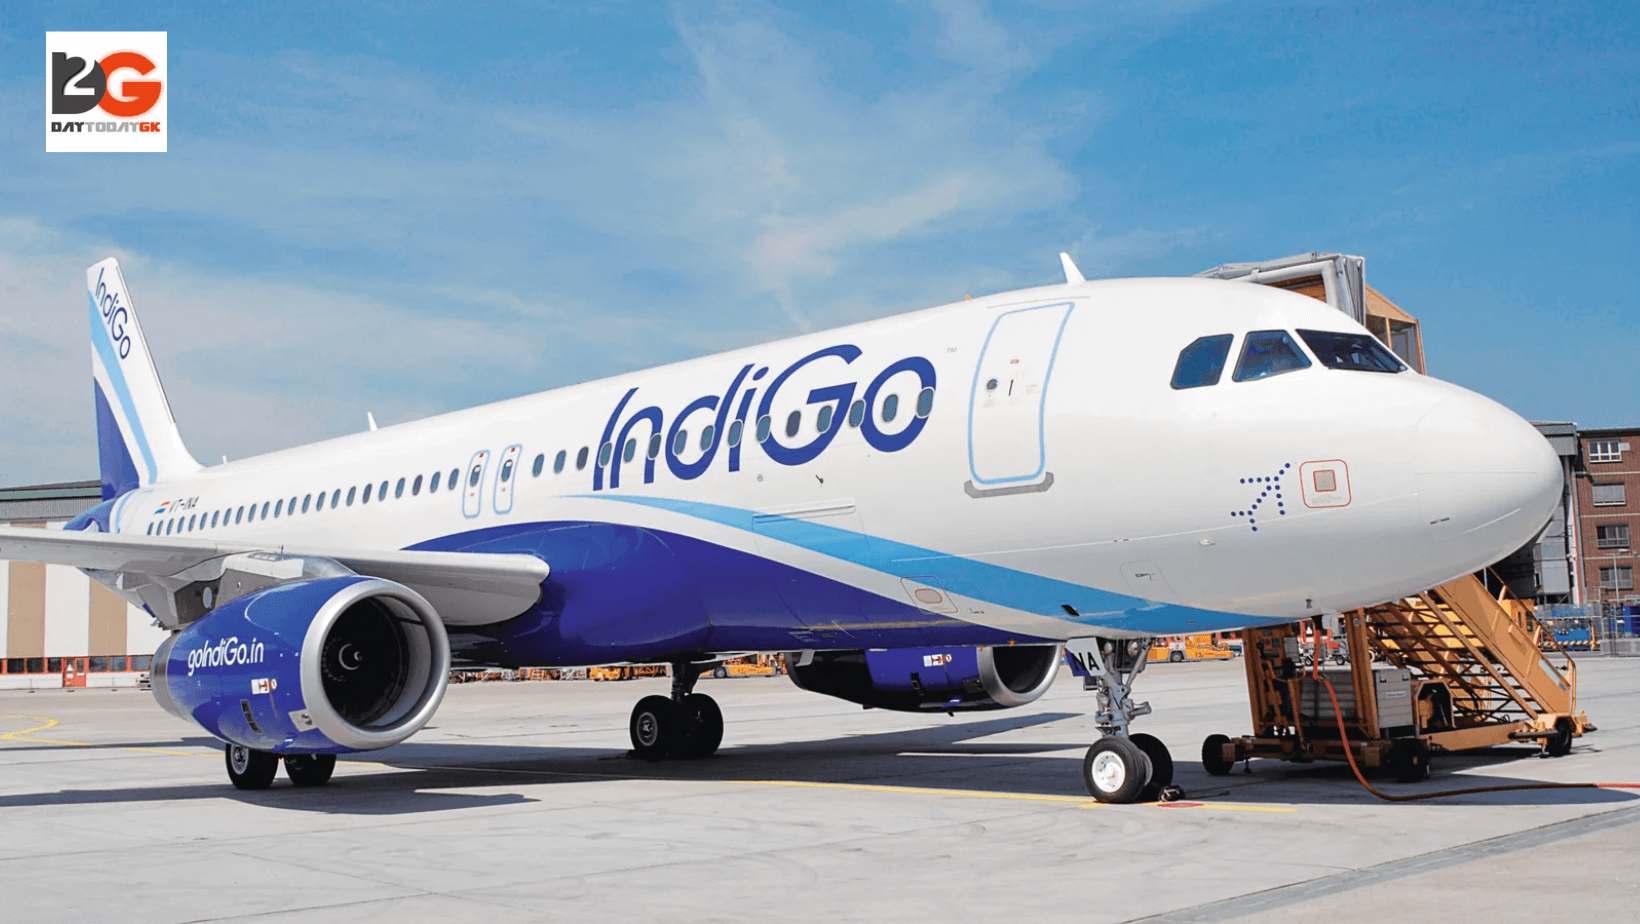 IndiGo Becomes First Indian Airline to Carry 100 Million Passengers a Year